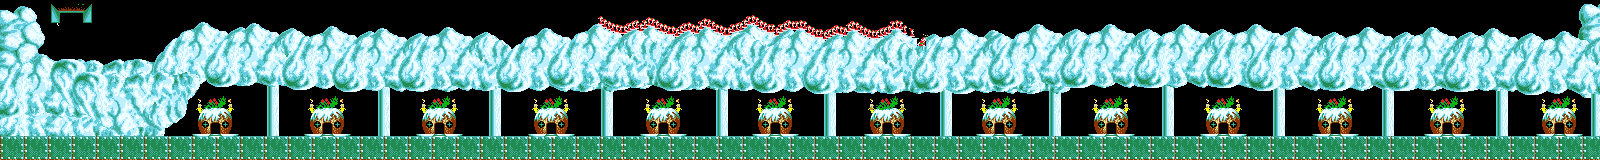 Overview: Holiday Lemmings 1994, Amiga, Blizzard, 3 - Check Your Hints!